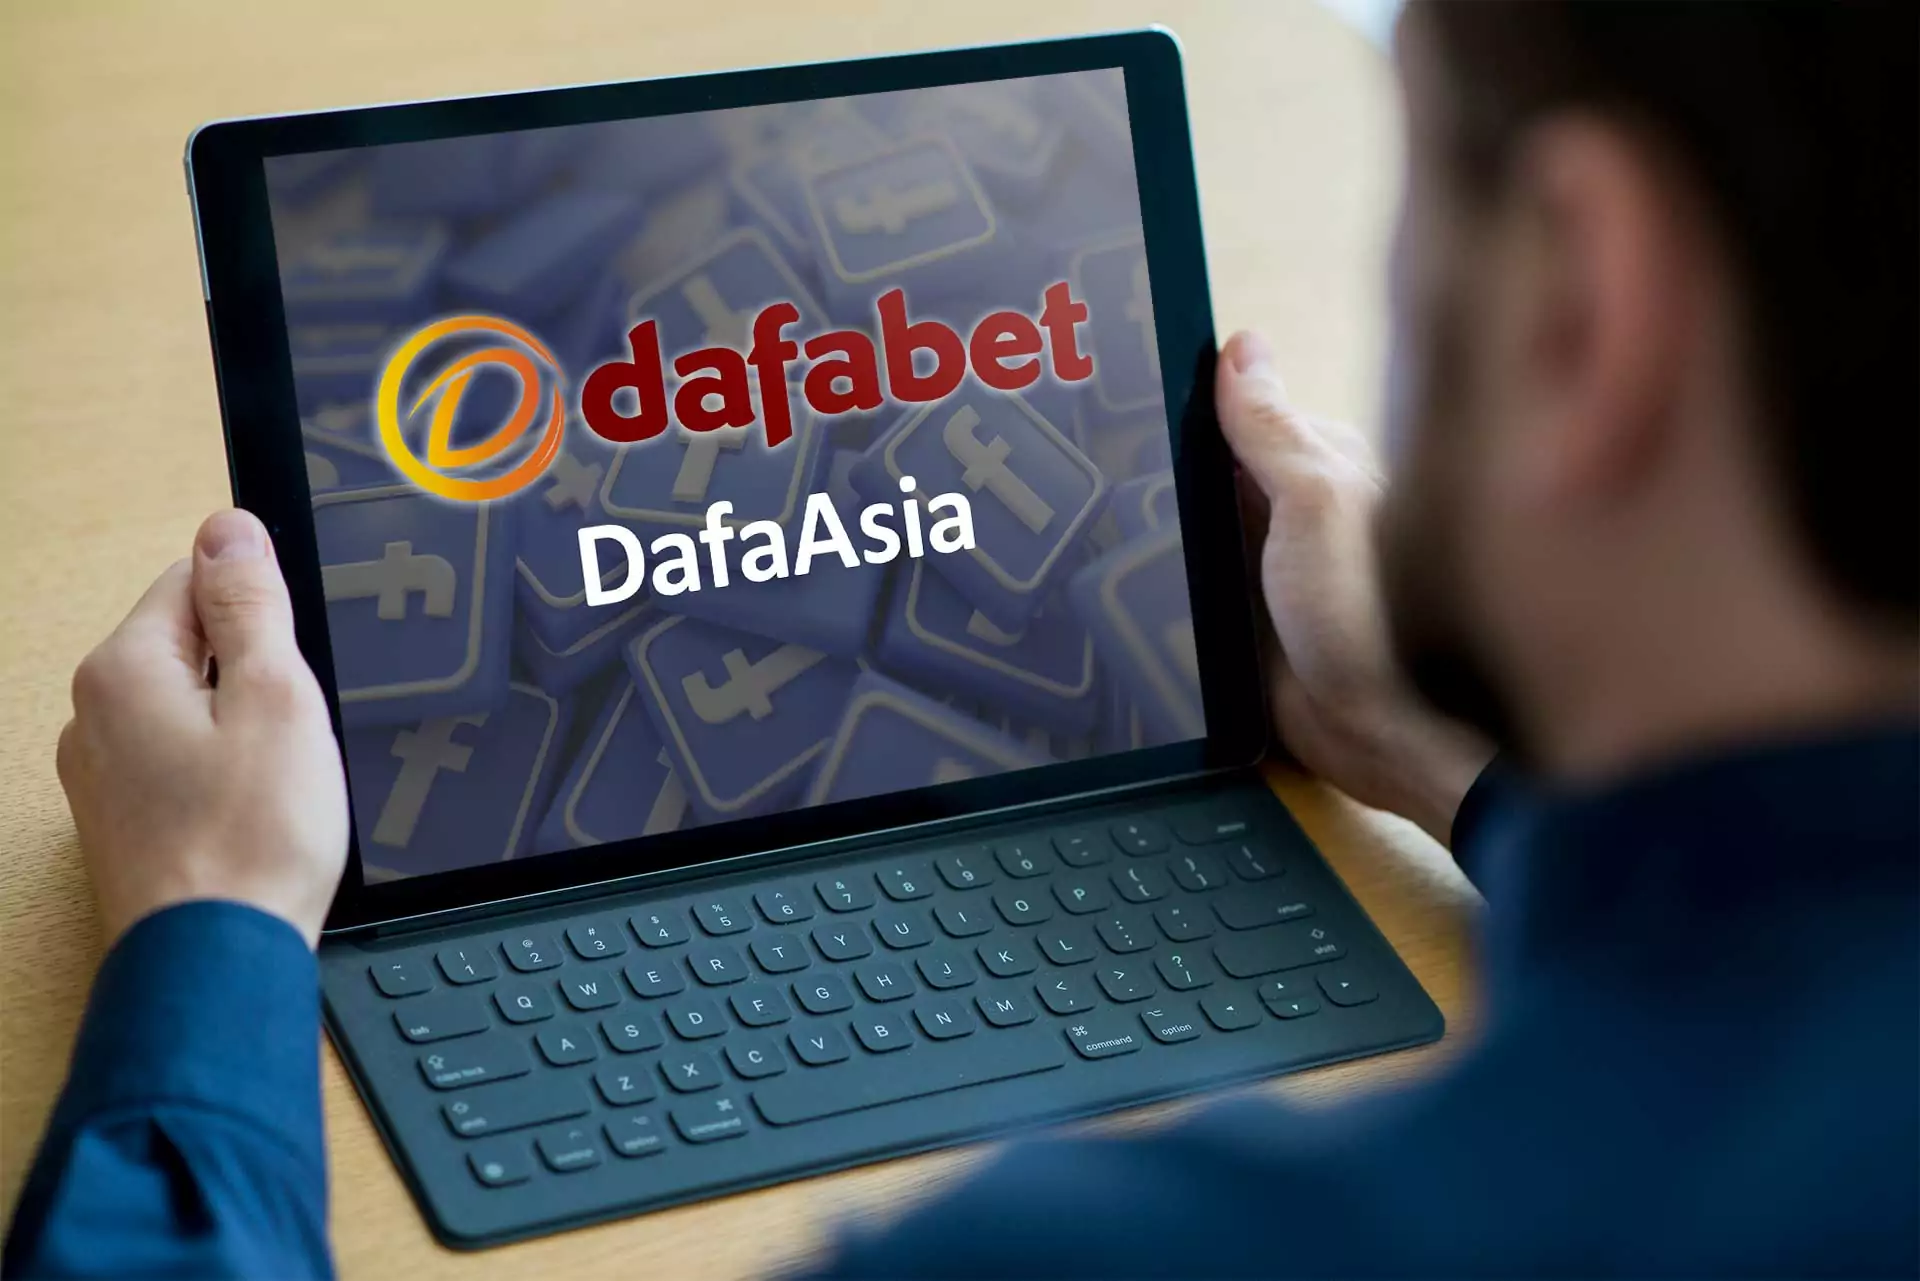 You can also reach the Dafabet support team in Facebook.